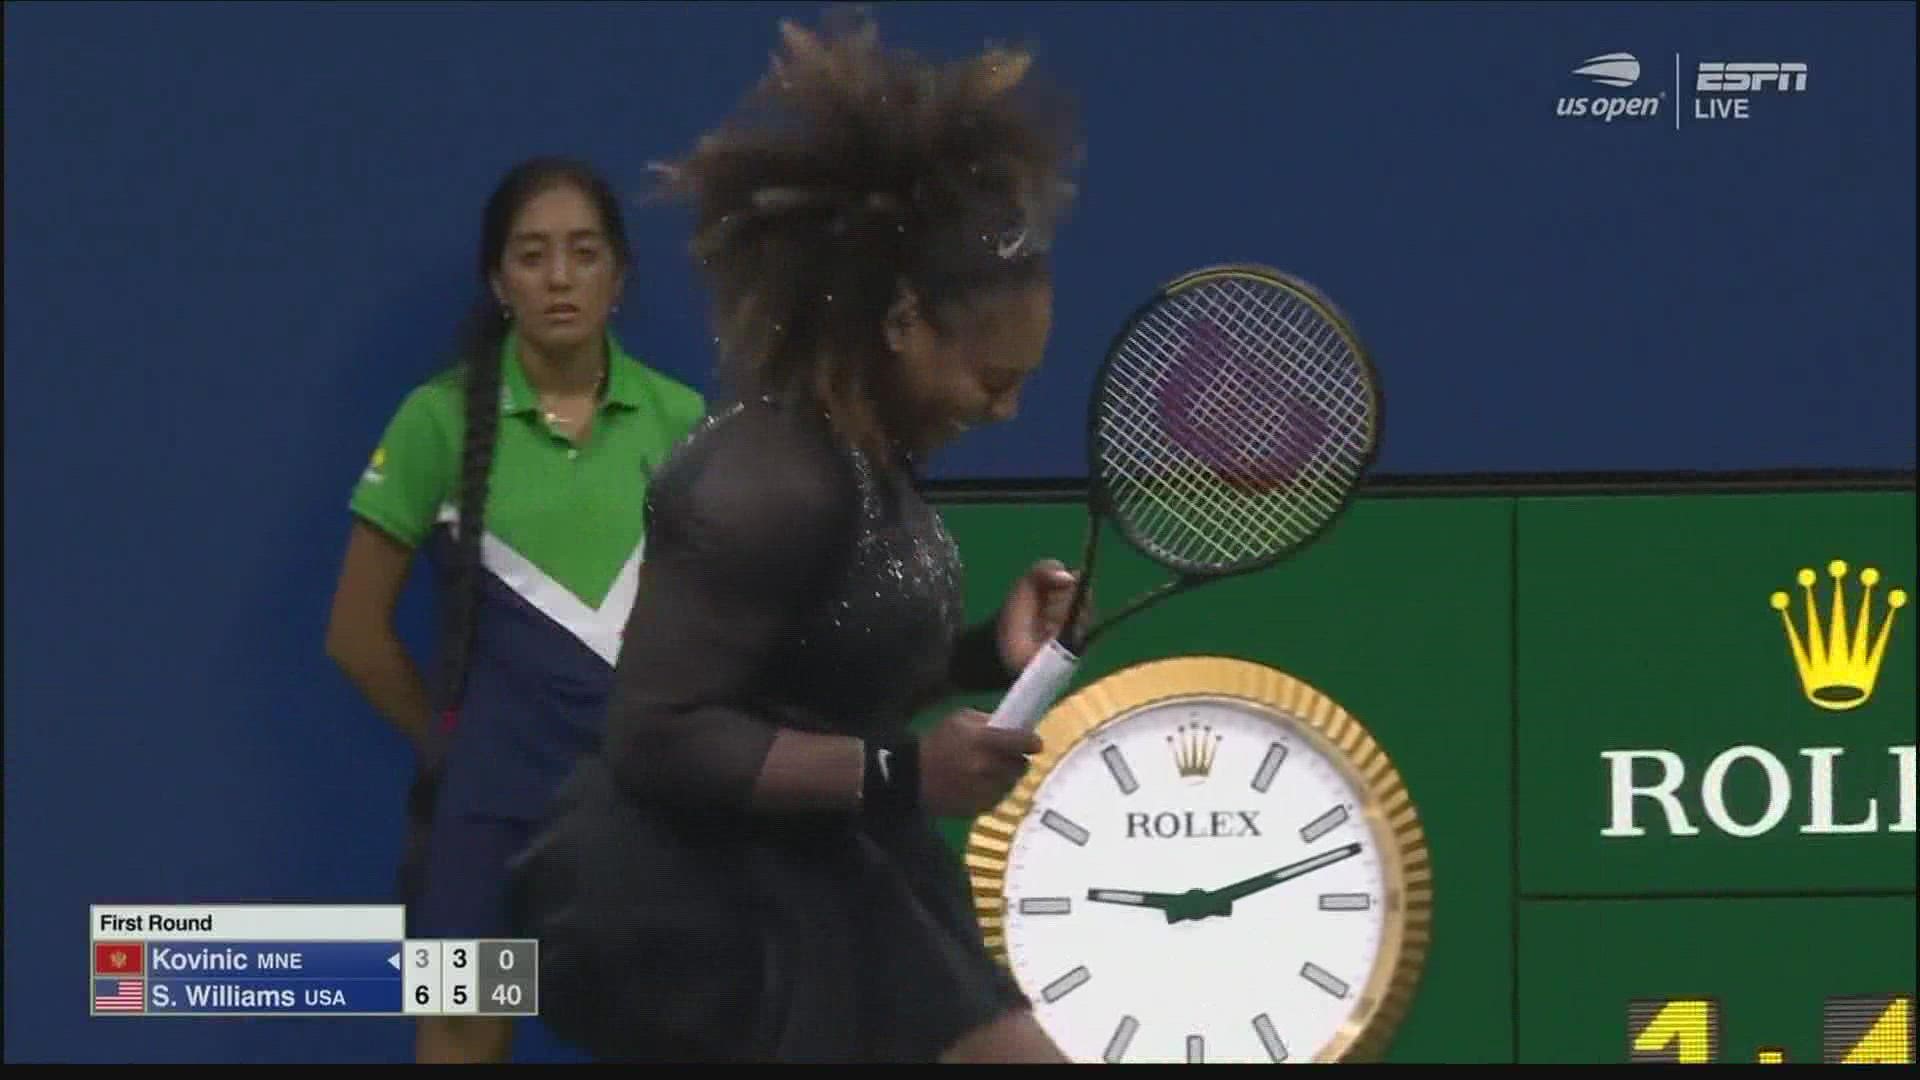 Serena Williams in action at the US Open tennis tournament firstcoastnews